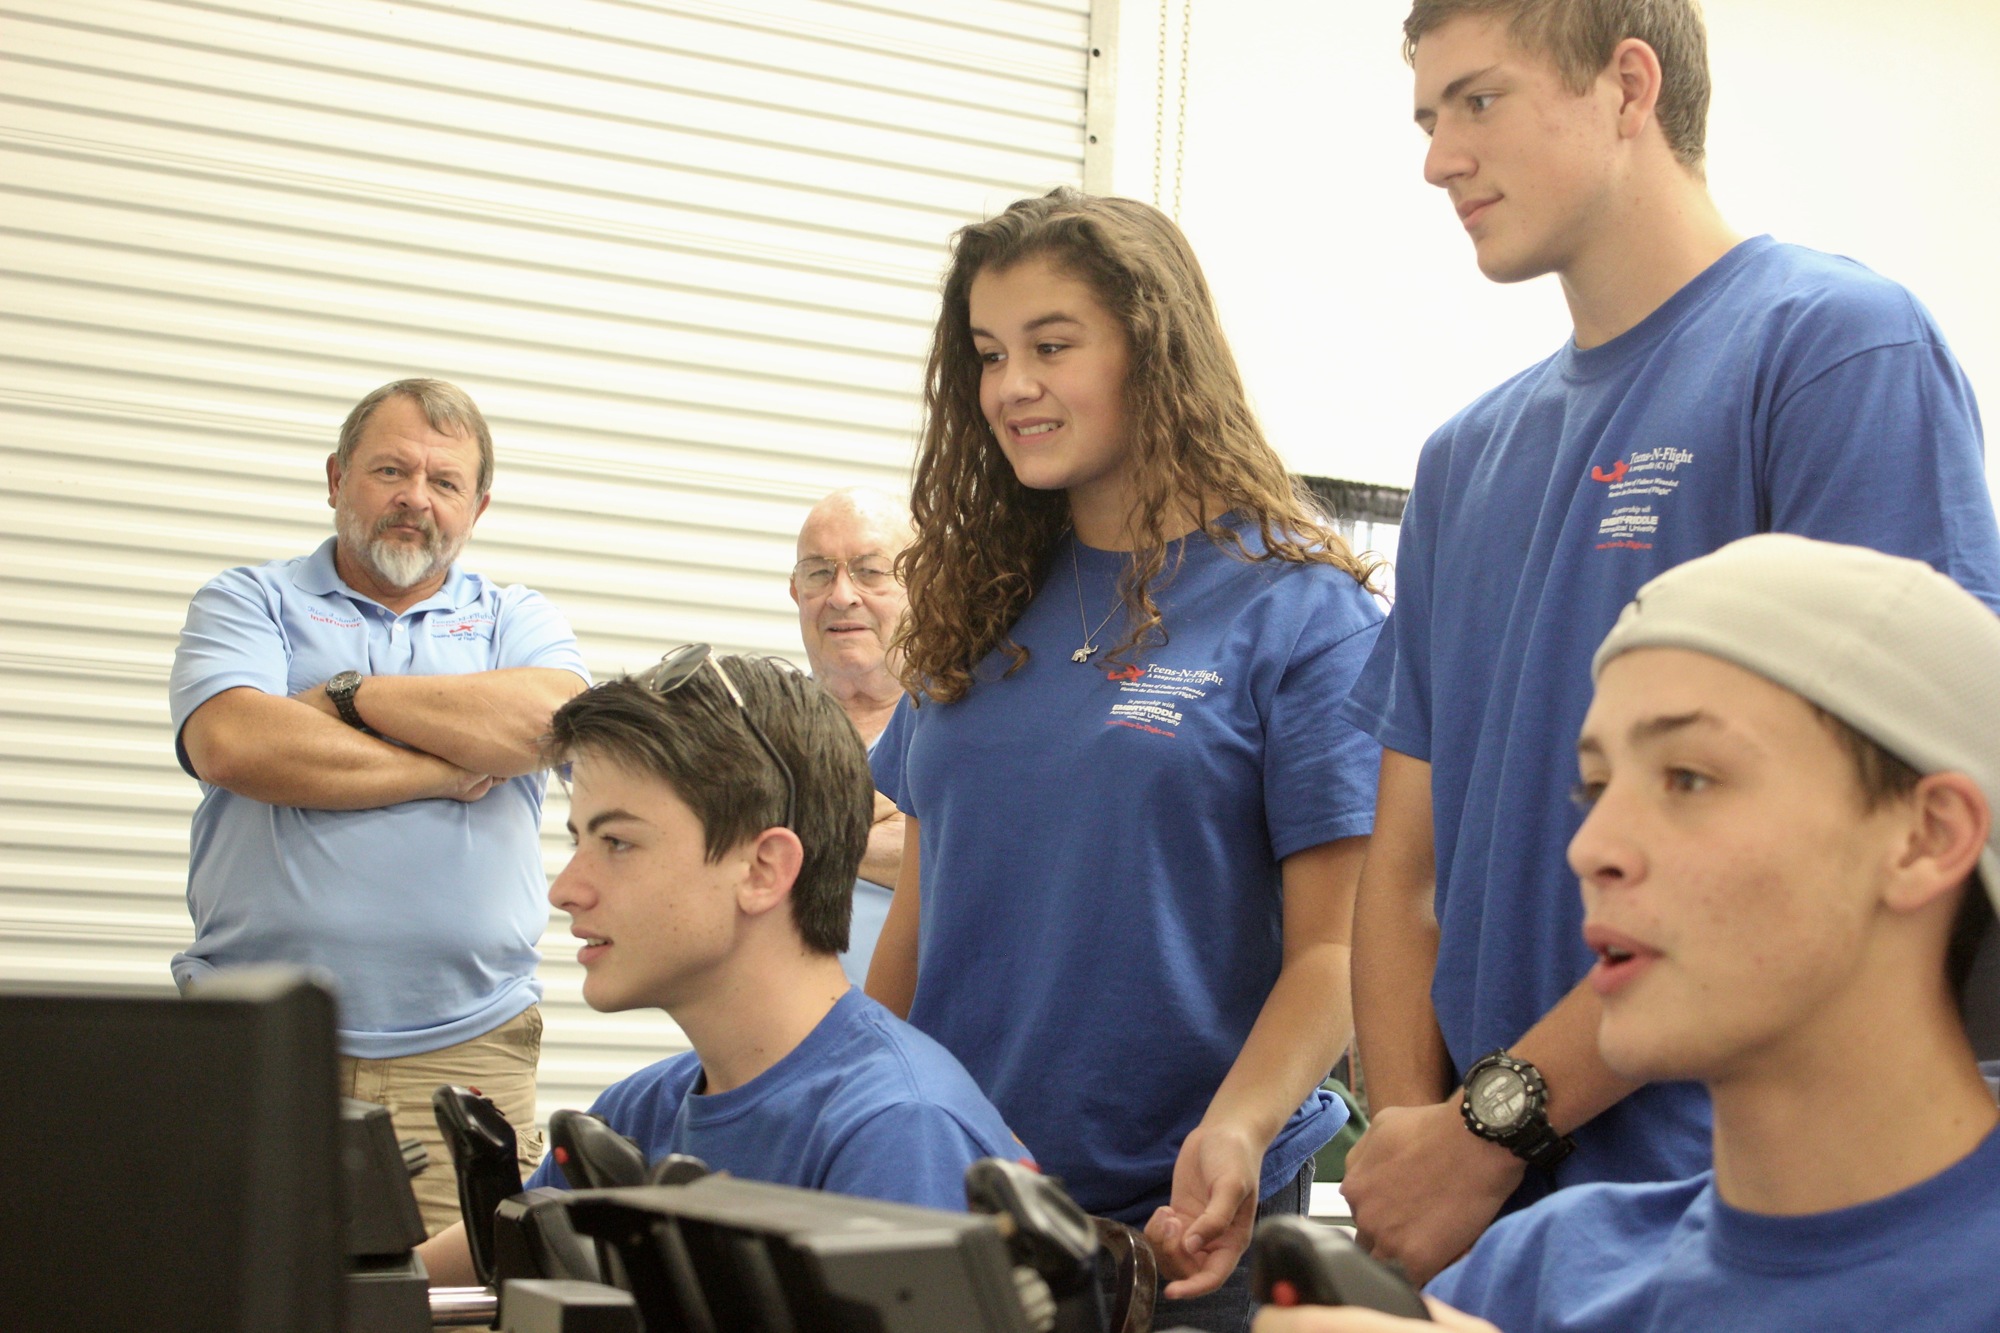 The students practice their aviation skills on a flight simulator. Photo by Ray Boone